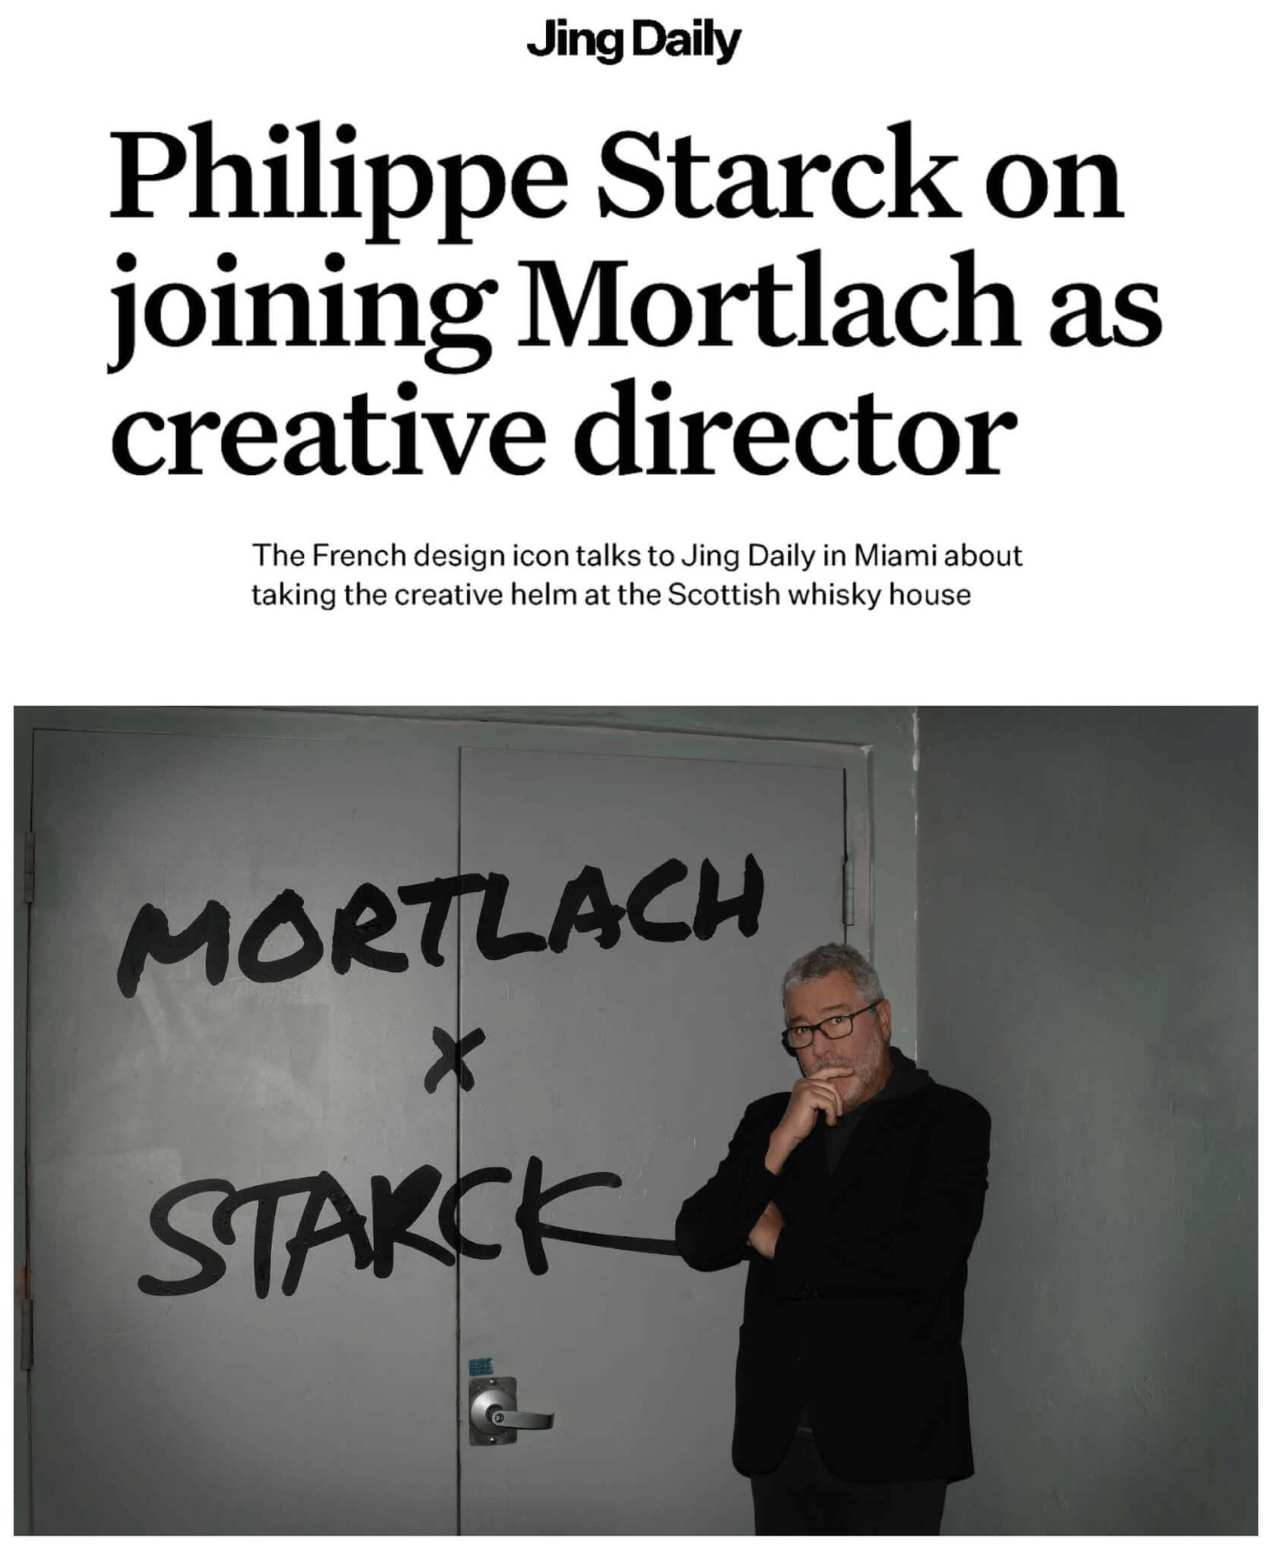 Philippe Starck on joining Mortlach as creative director